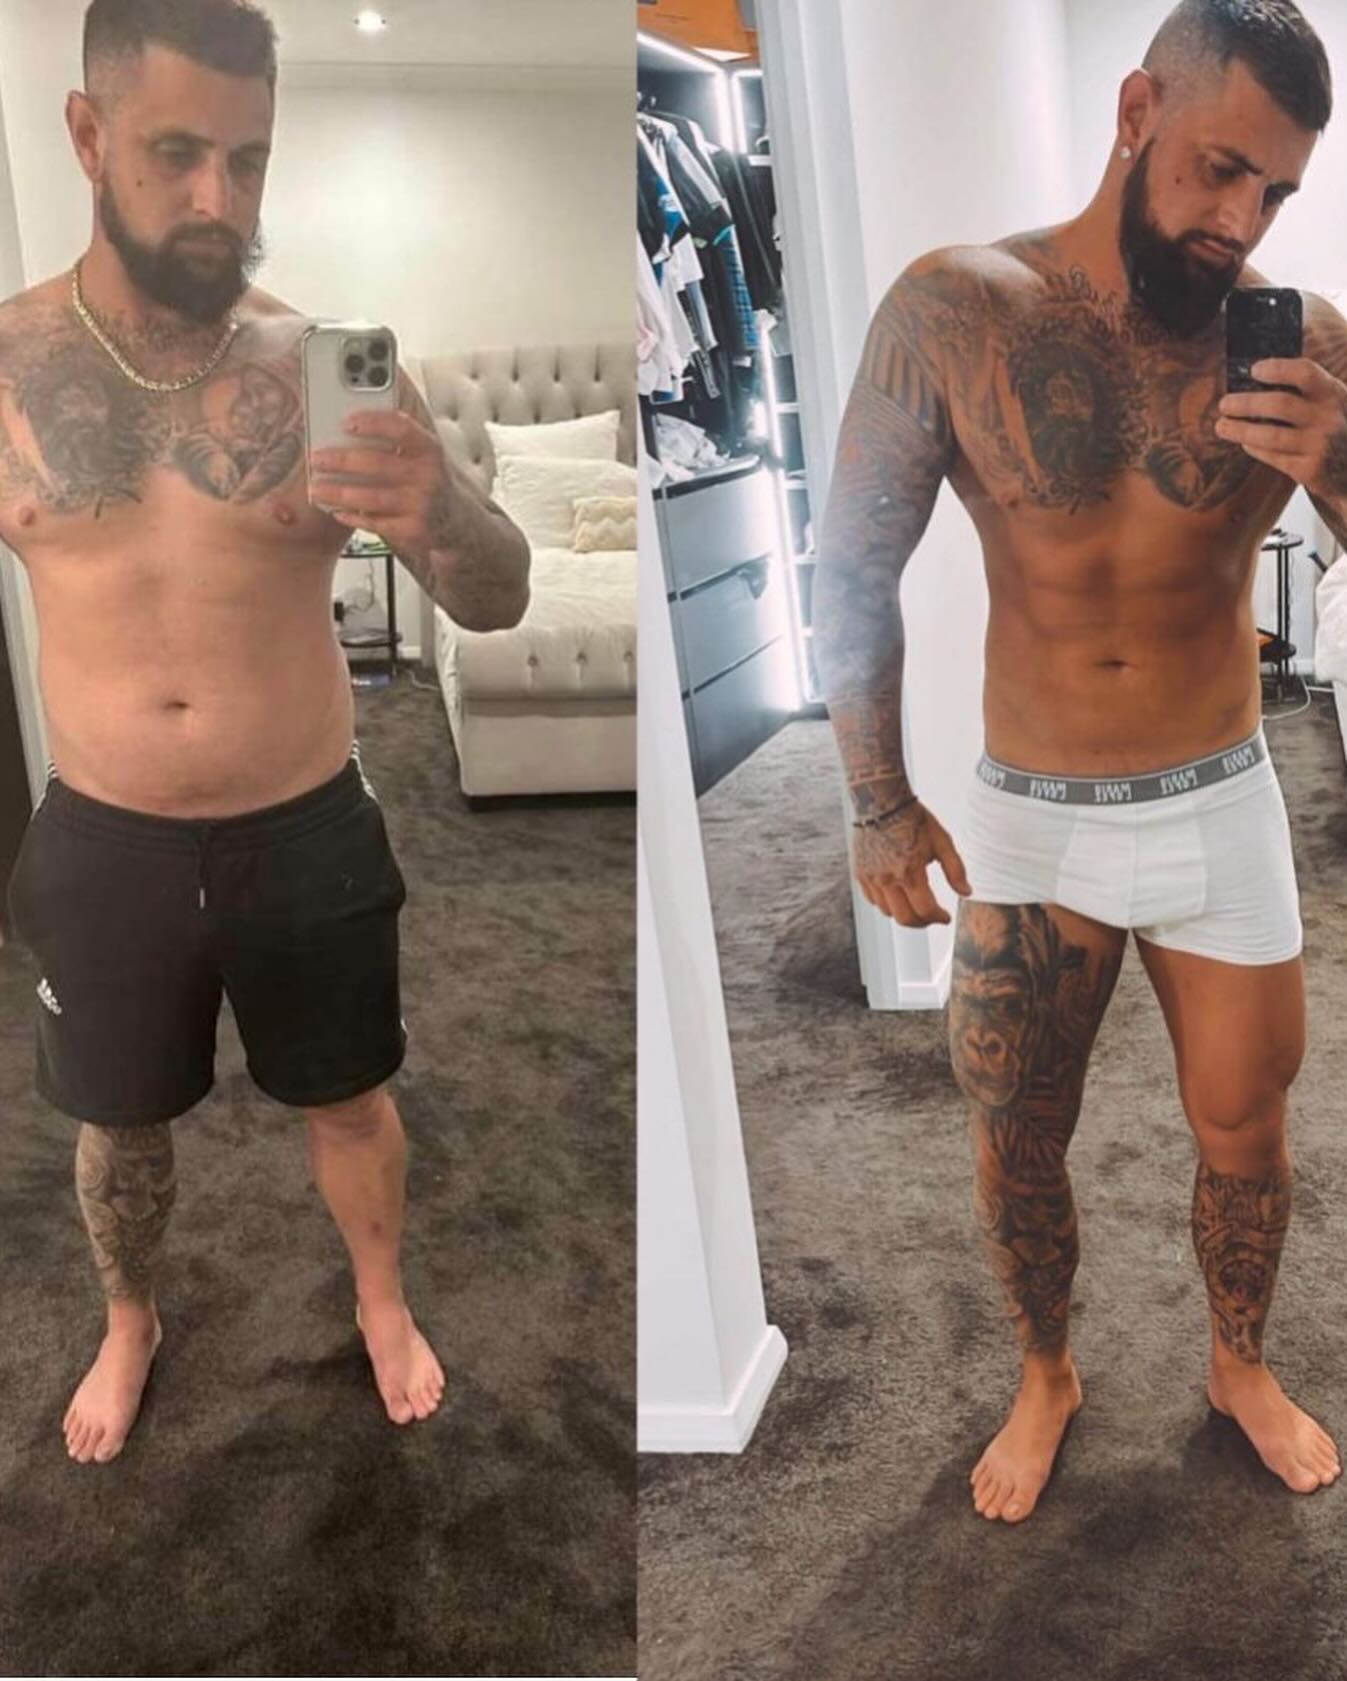 MEN‼️if you want something enough, it’s time to make it happen! No gym needed ‼️

Training to suit your lifestyle, not hinder it! If you want to gain back your time, bulletproof your body for everyday life and create healthy sustainable lifestyle habits that gives you longevity while having the freedom to train wherever suits you best! 

DM OR COMMENT “FIT” BELOW NOW TO APPLY FOR 1 on 1 coaching. This isn’t just a “training program” it incorporates multiple different elements that will help you THRIVE in every area of your life! Be the best version of yourself!

If you’re ready to finally make a mental and physical change now is the time . COMMENT OR DM “fit” to apply. Limited spots available! 

#bodyweighttraining #kettlebells #dumbbells #nogymneeded #homeworkouts #onlinecoach #outdoorworkout #wodoftheday #bodytransformation #transformation #functionalfitness #healthcoach #bodyweightworkout #kettlebellworkout #coaching #dumbbellworkout #dadbod #nogymnoproblem #workoutanywhere #calisthenics #functionaltraining #onlinetrainer